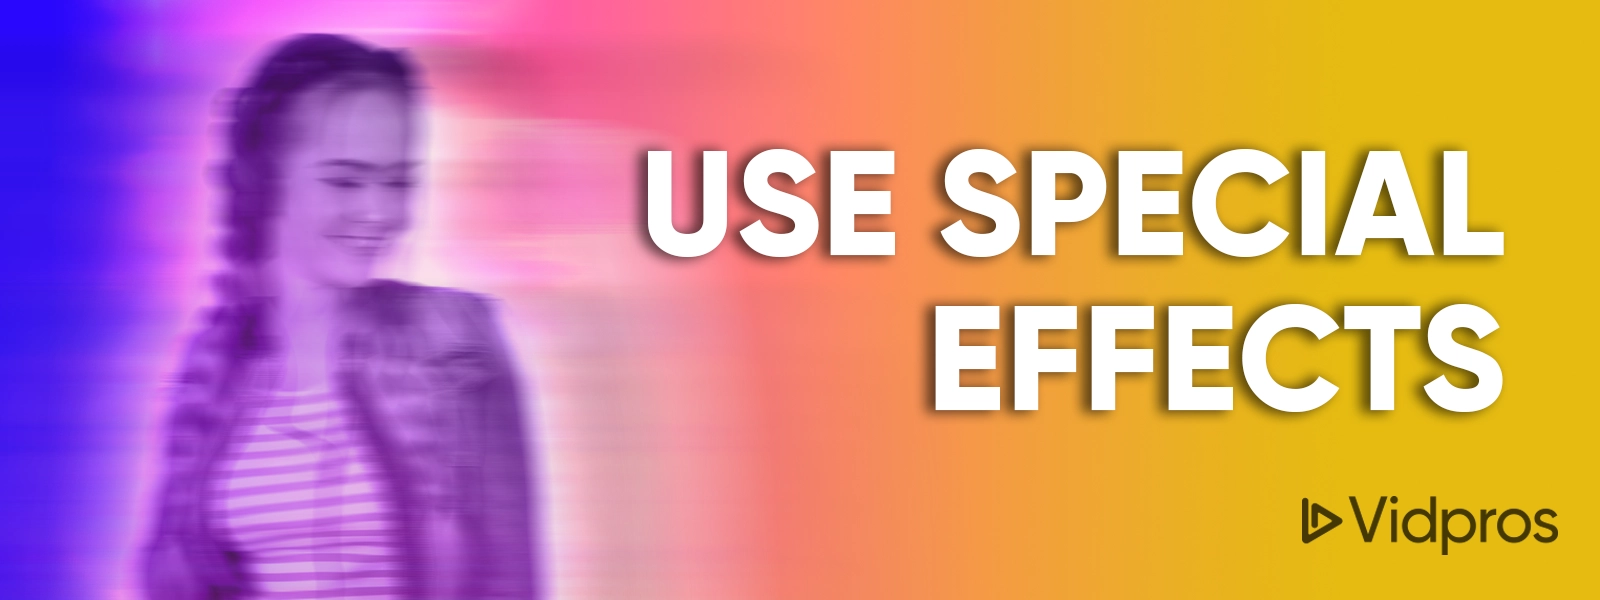 Use Special Effects Sparingly Yet Efficiently